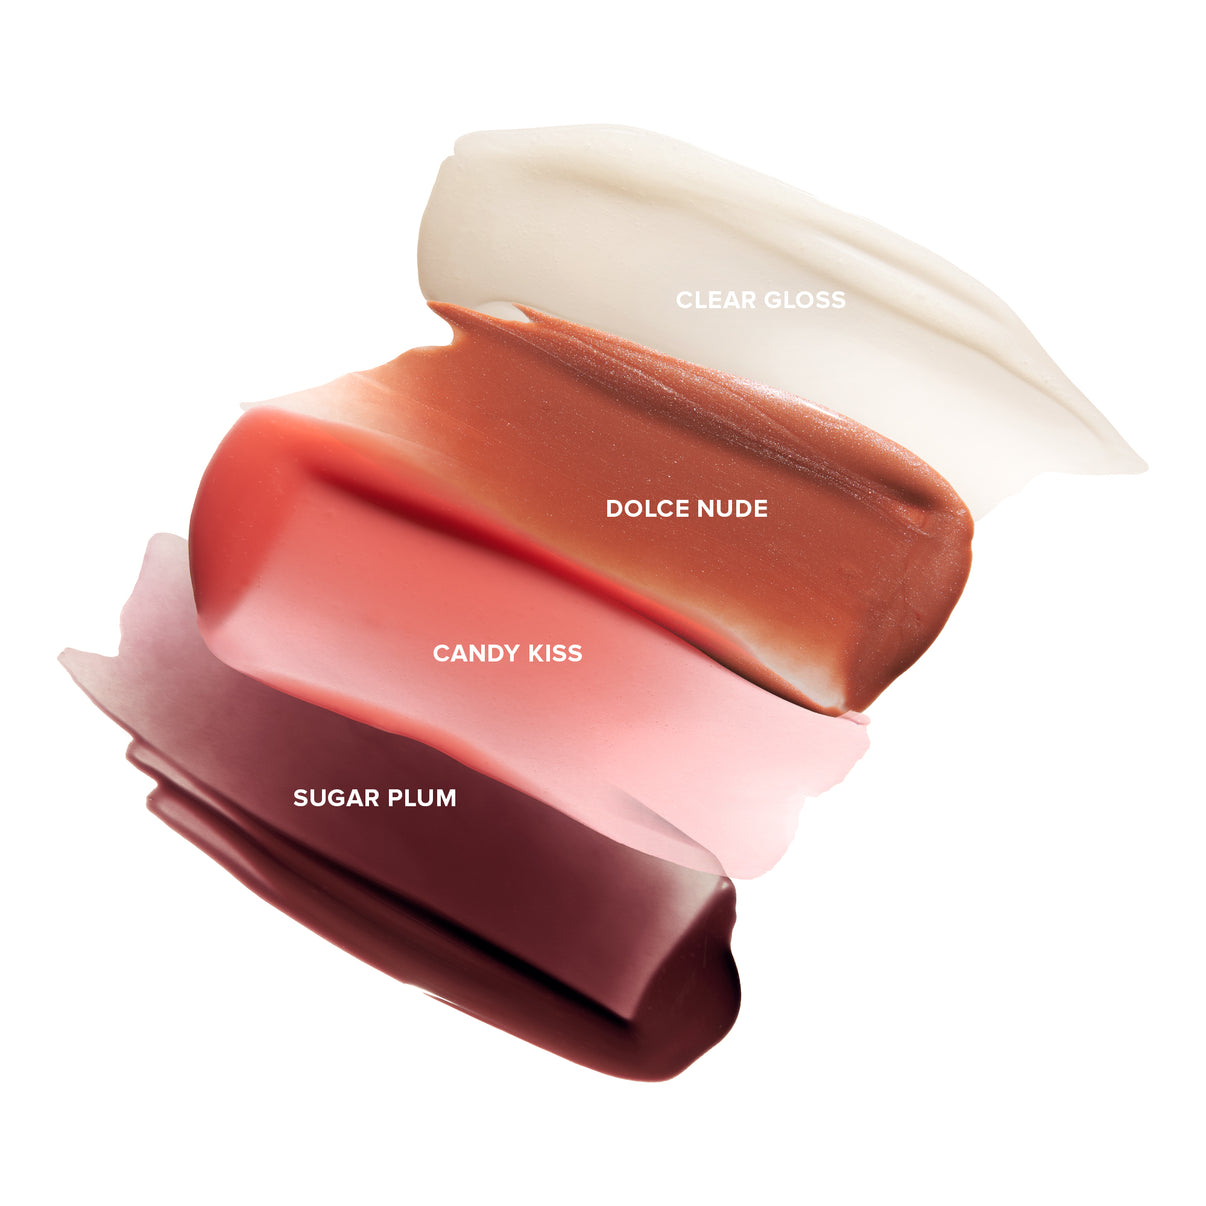 •	CLEAR GLOSS DOLCE NUDE CANDY KISS SUGAR PLUM Hydrating Peptide Lip Butter swatches